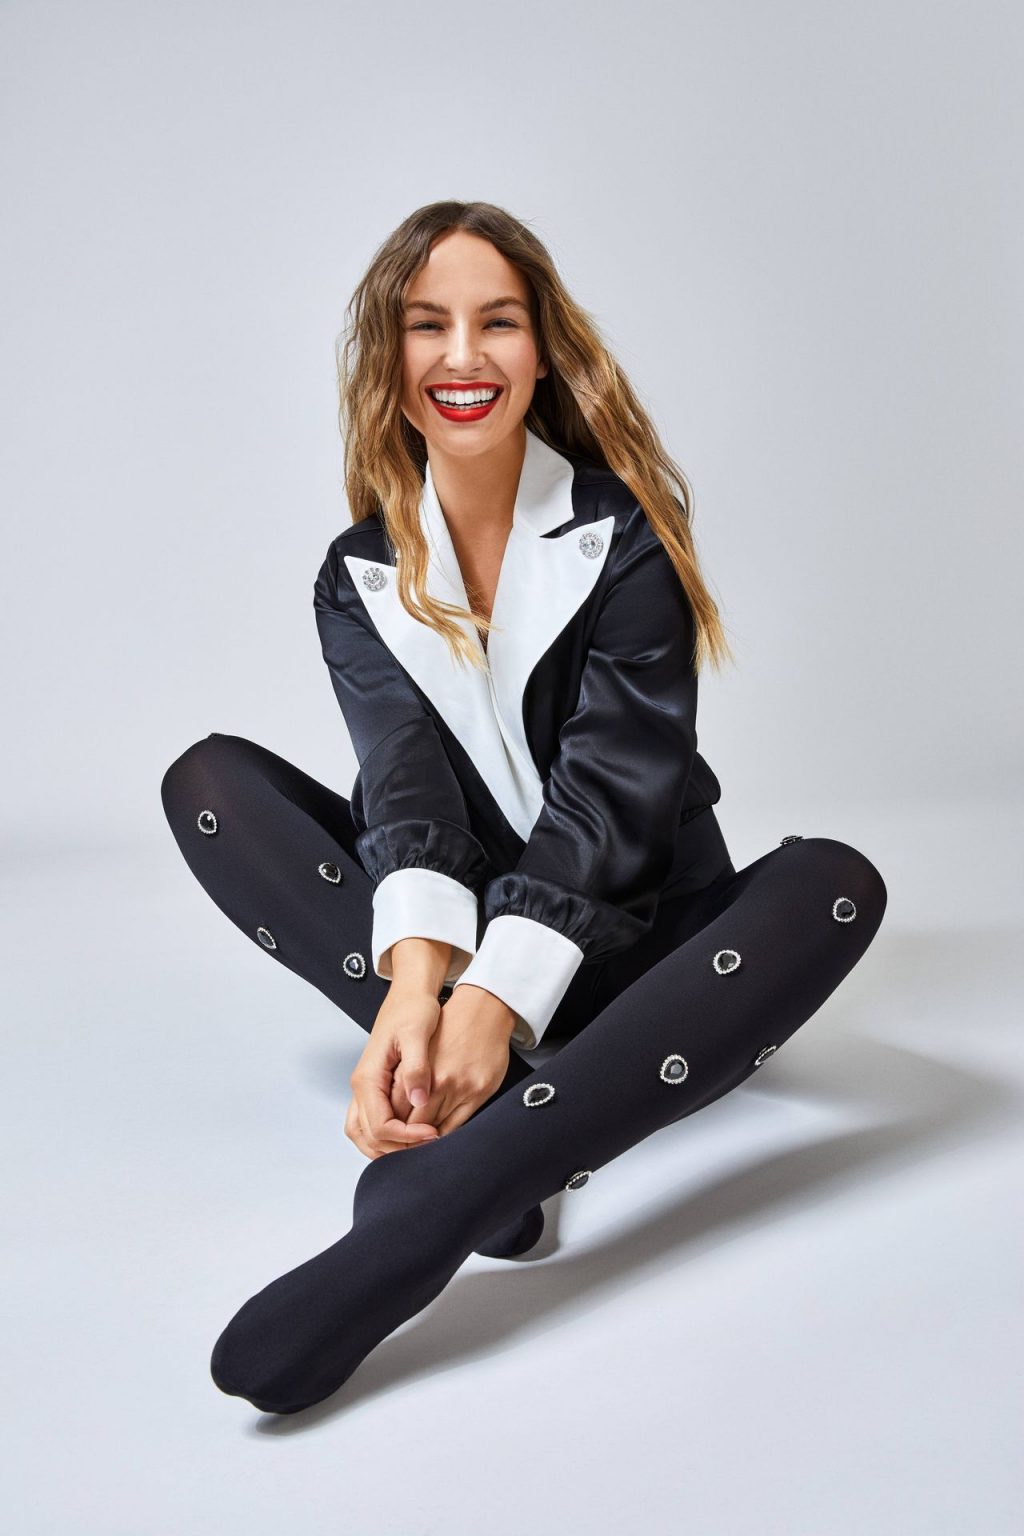 Emma Louise Connolly Stars in Calzedonia Legwear Campaign (19 Photos)